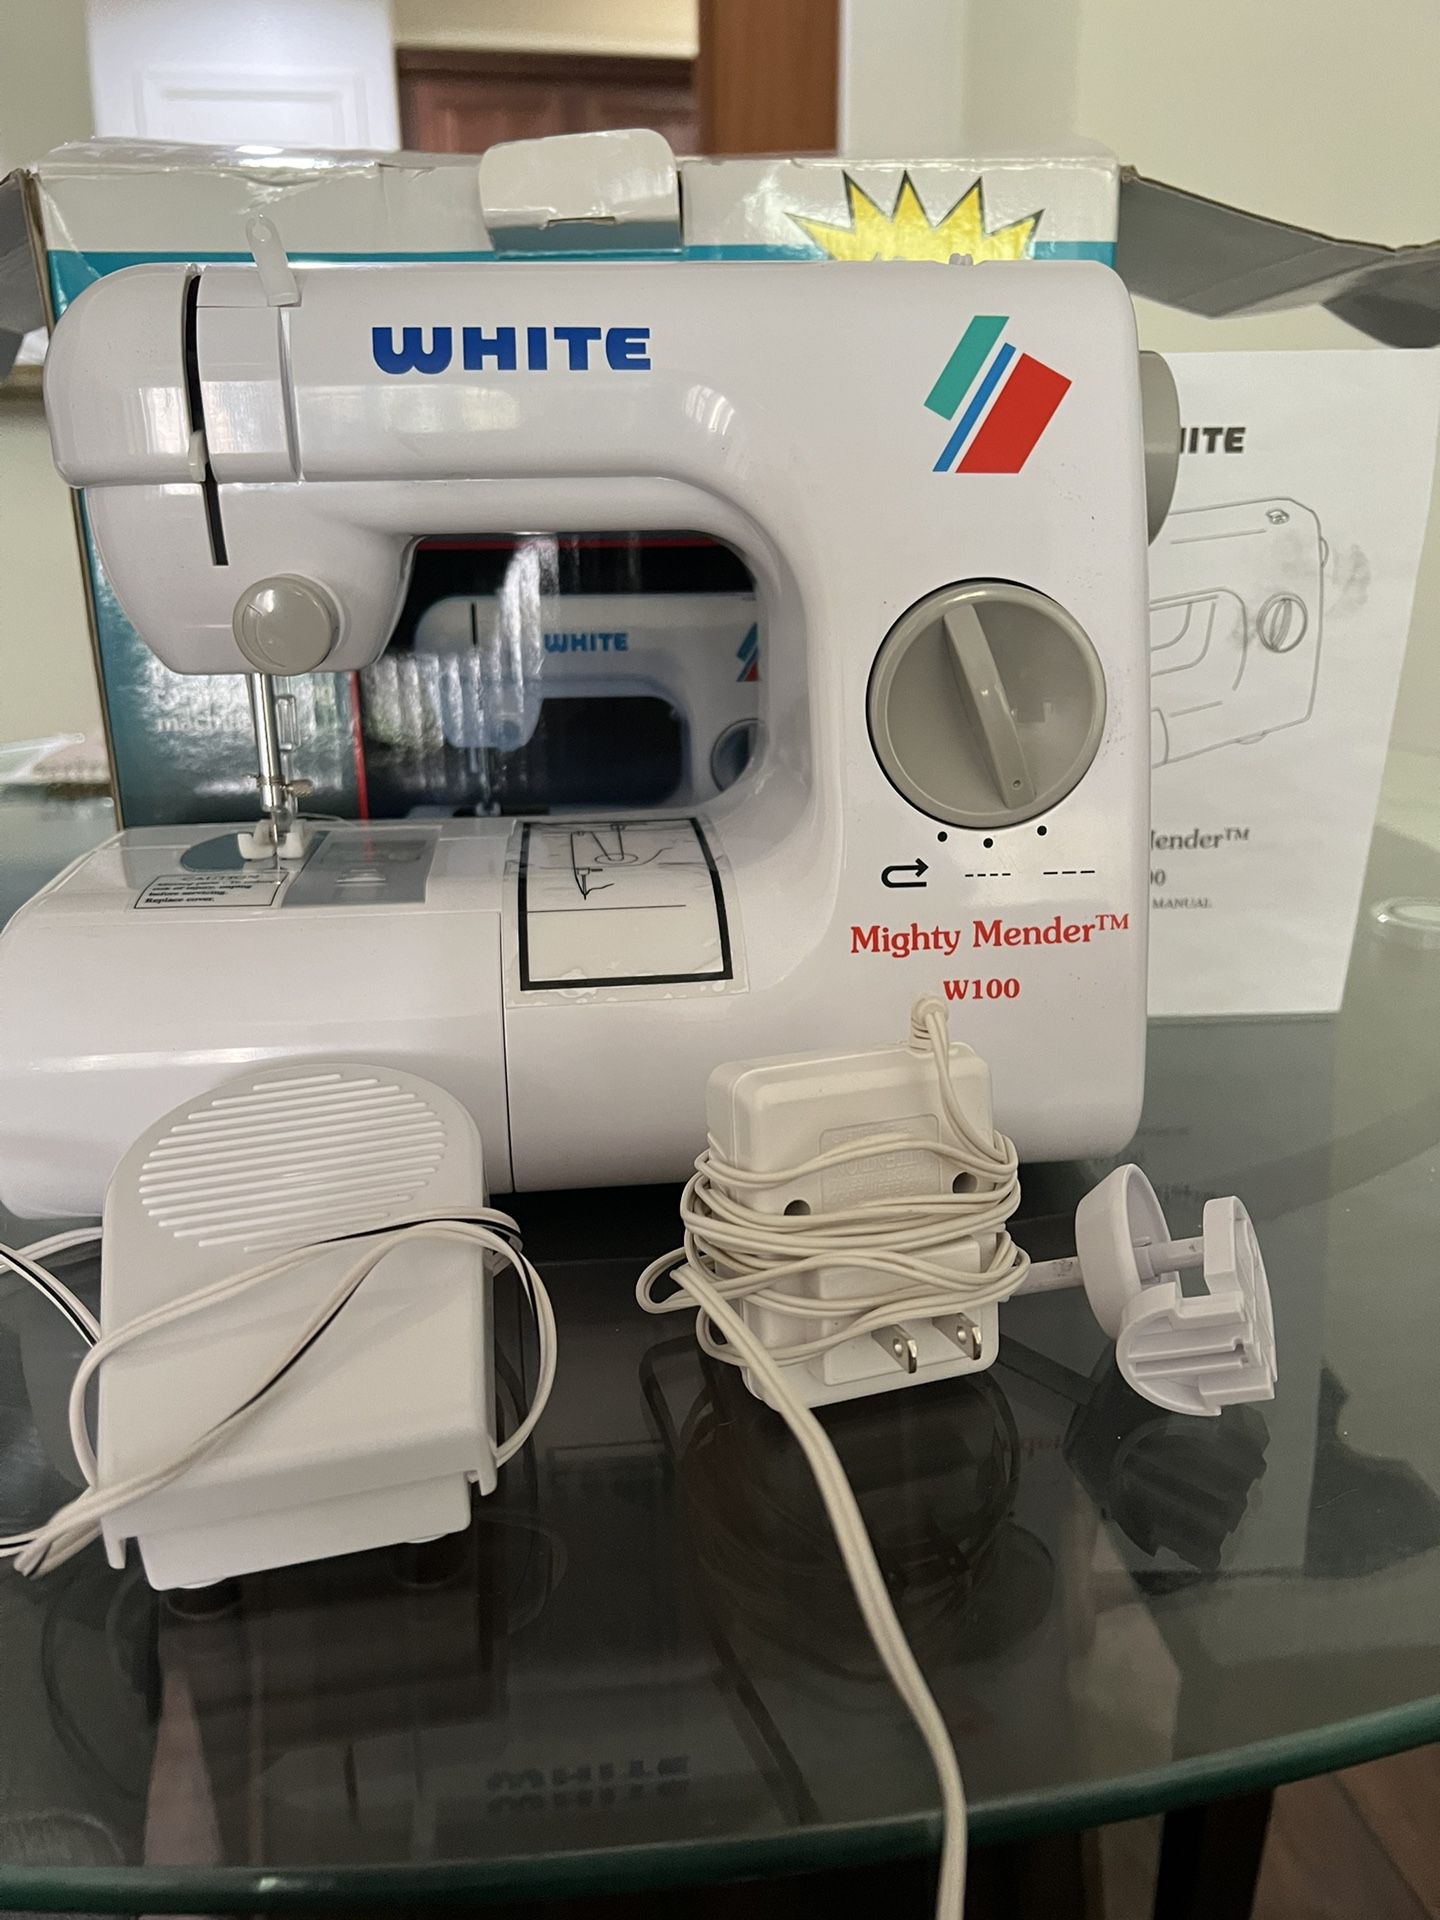 Portable Sewing Machine 